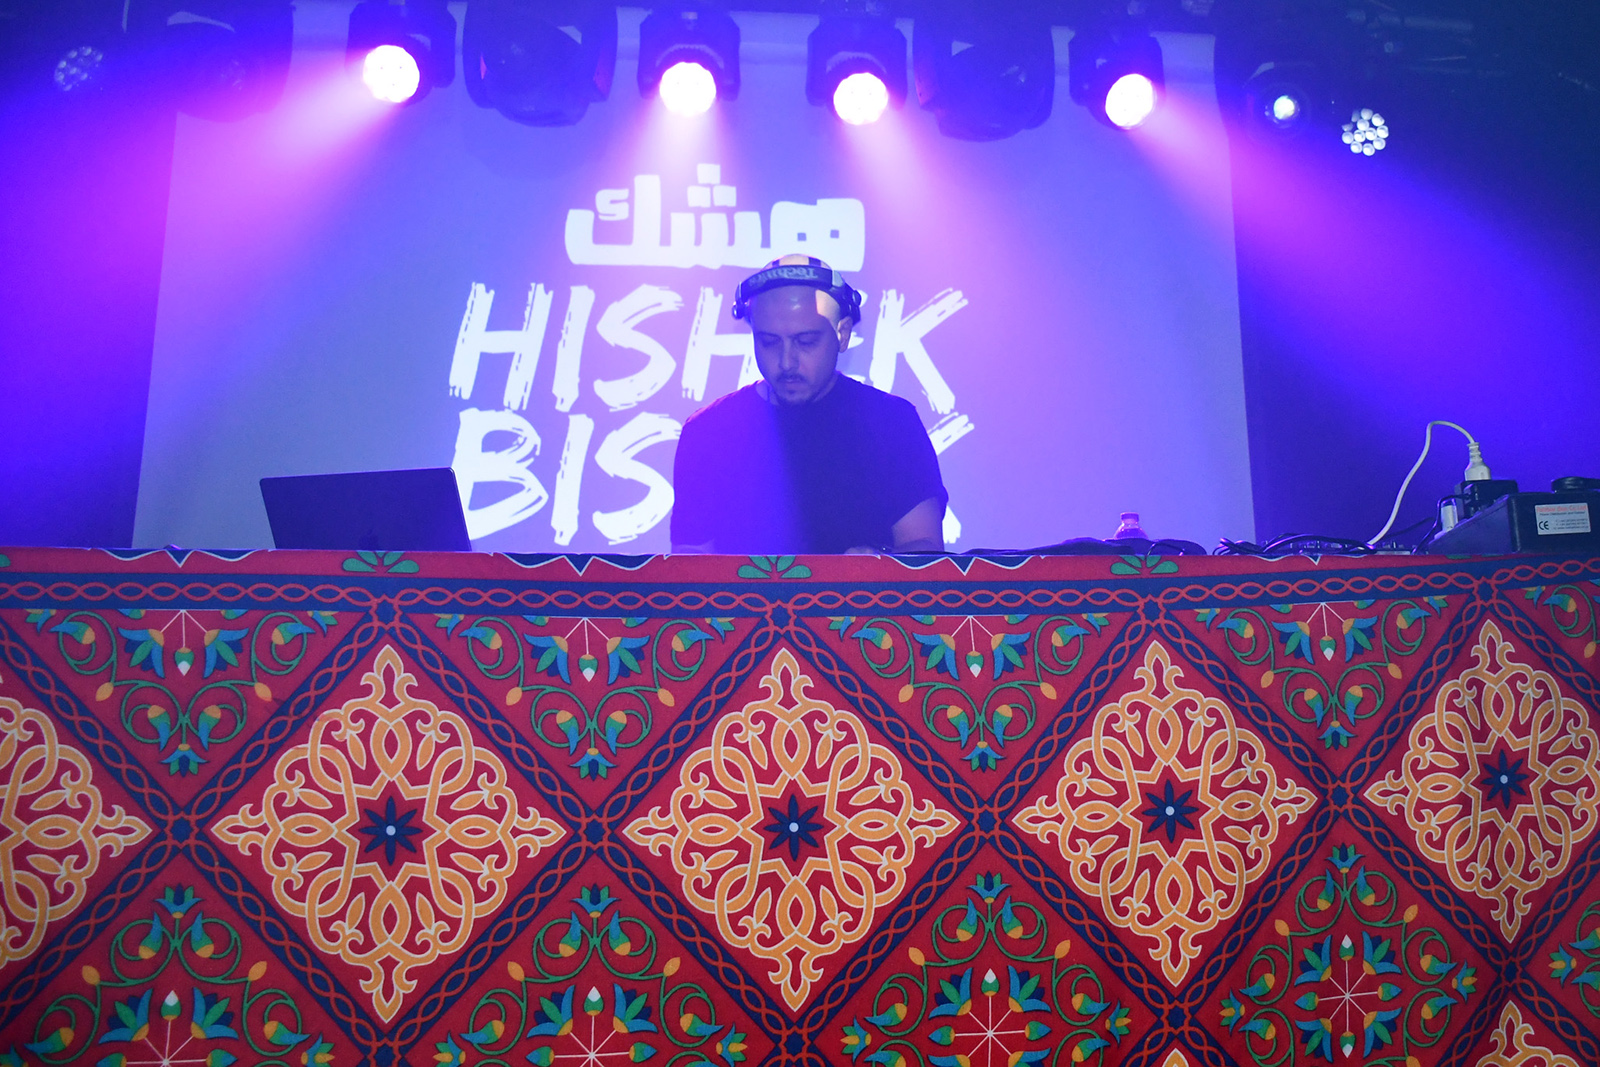 DJ SuperMike performs at Hishek Bishek, a club night dedicated to Arabic music from around the world, held in London.